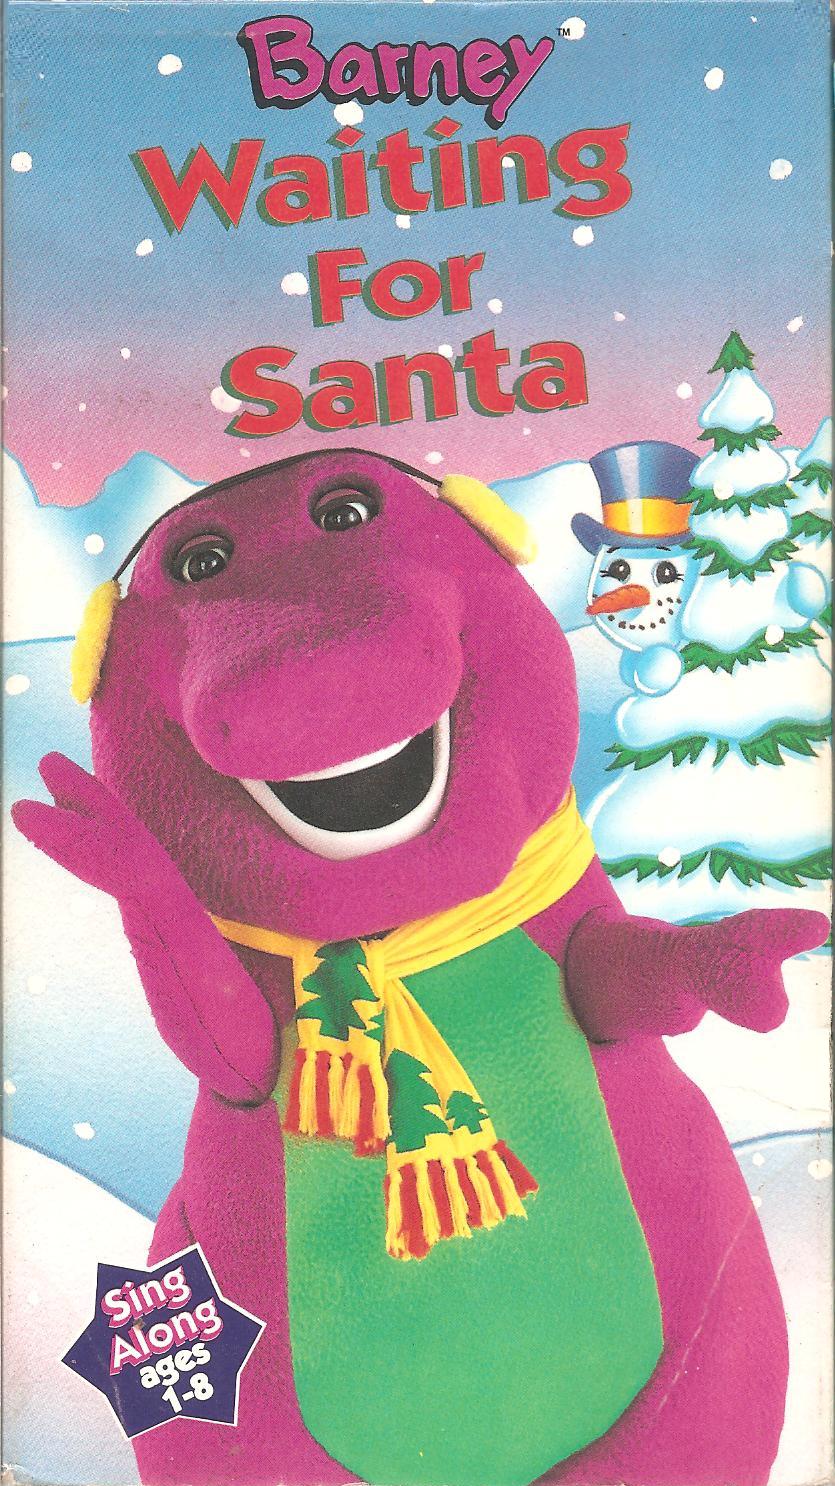 Trailers From Barney Waiting For Santa 1996 VHS Custom Time